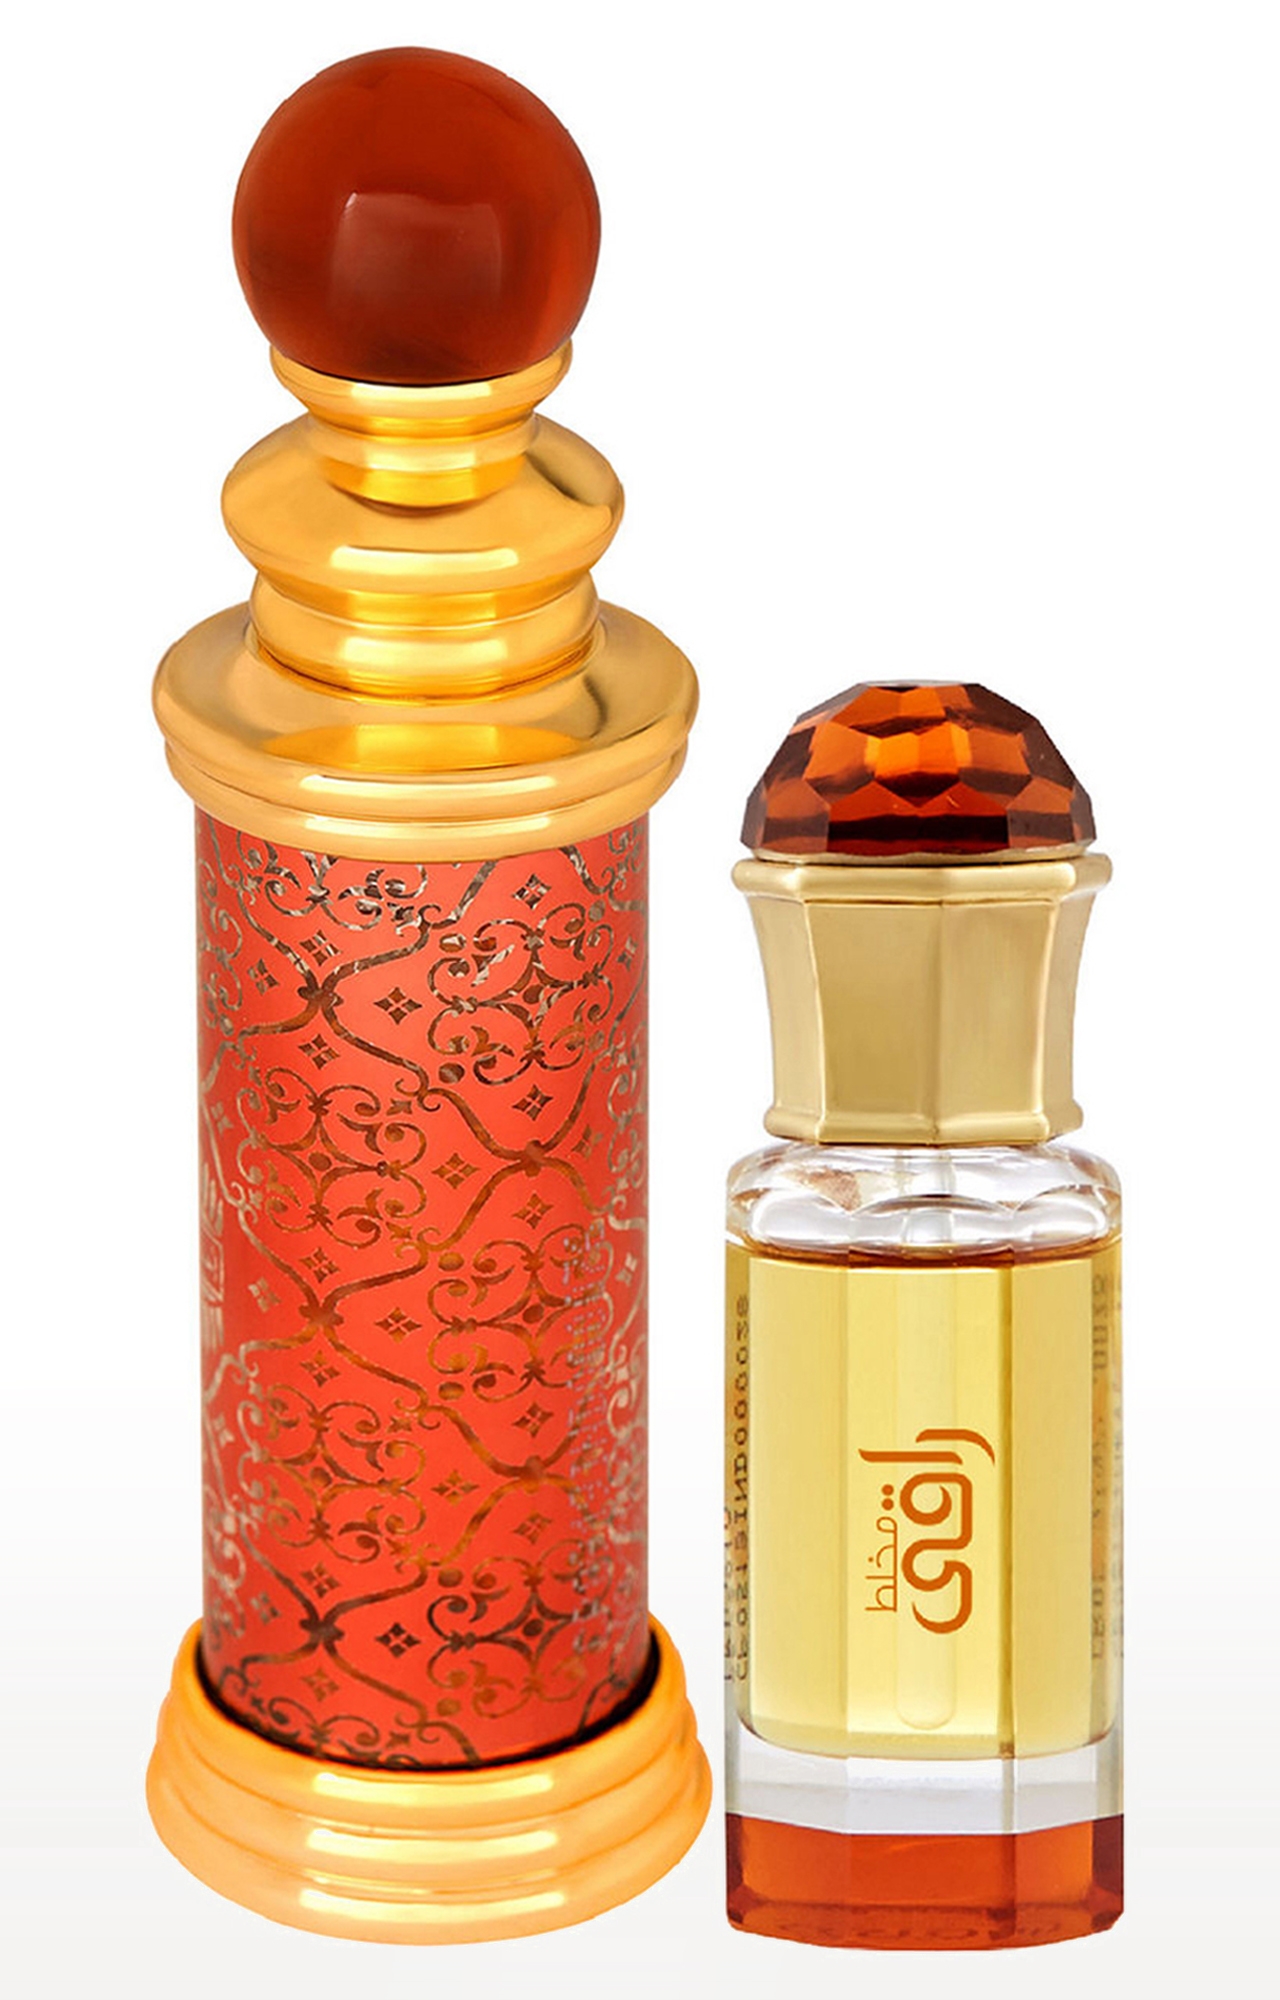 Ajmal | Ajmal Classic Oud Concentrated Perfume Attar 10Ml For Unisex And Mukhallat Raaqi Concentrated Perfume Attar 10Ml For Unisex